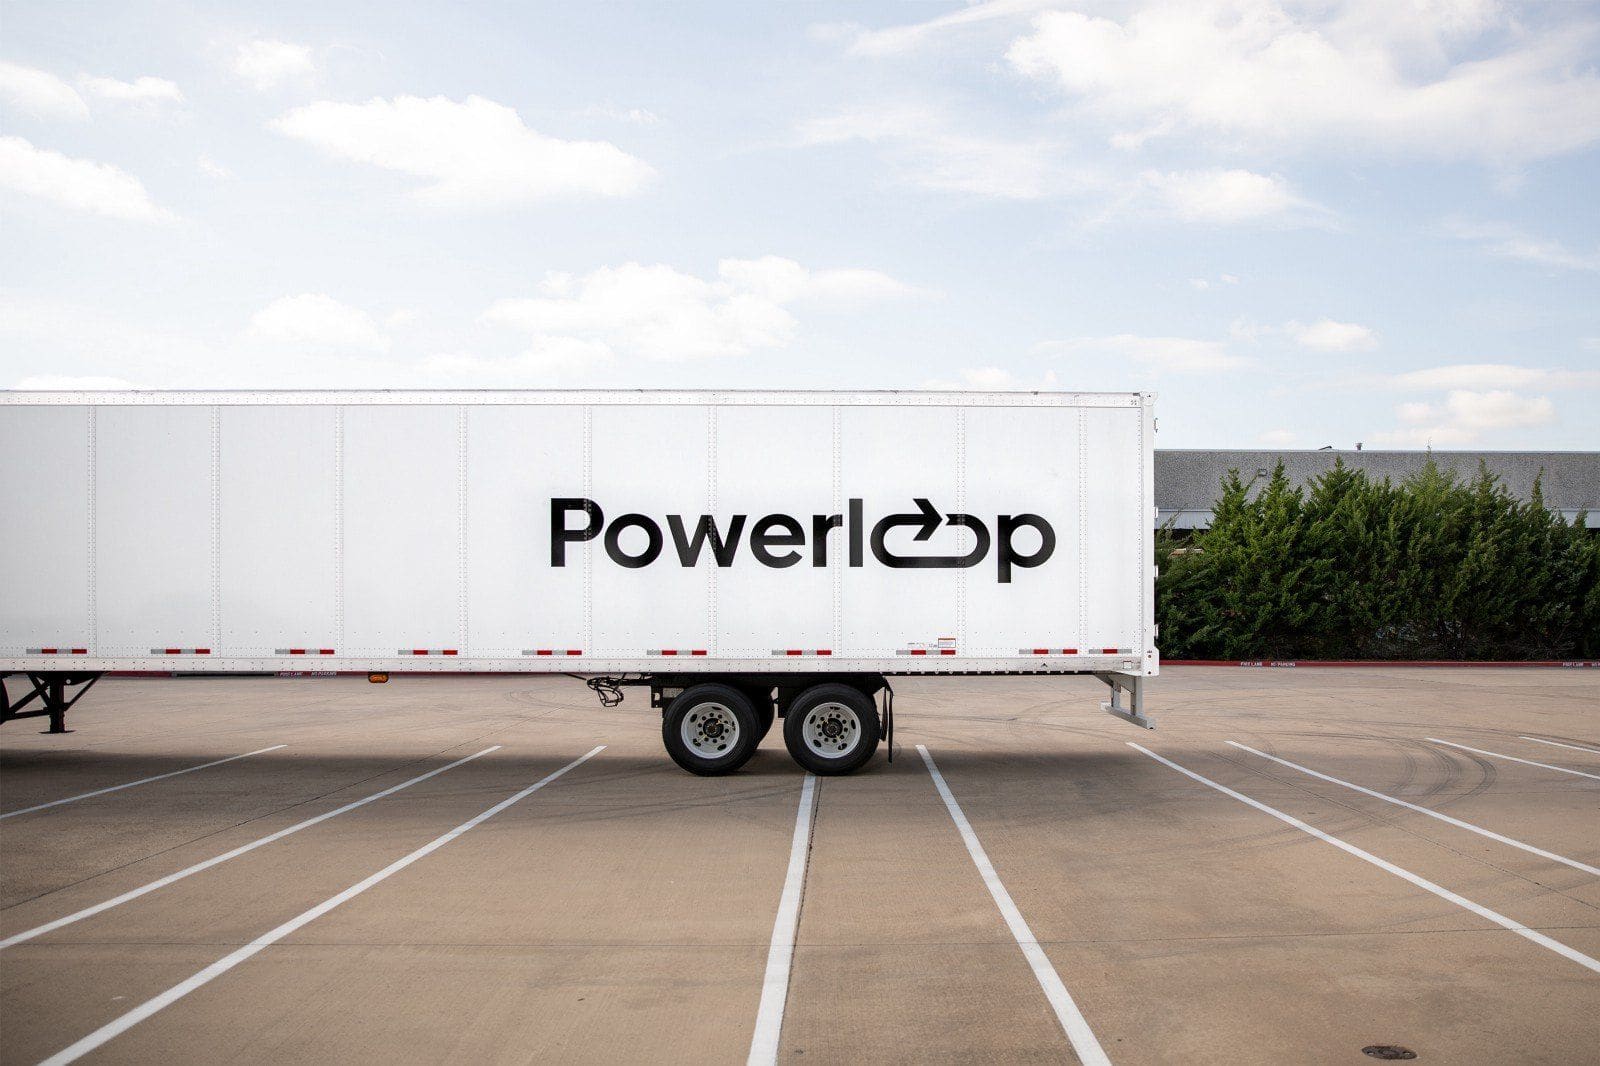 How Powerloop Helps Unlock Access to Power-Only Loads